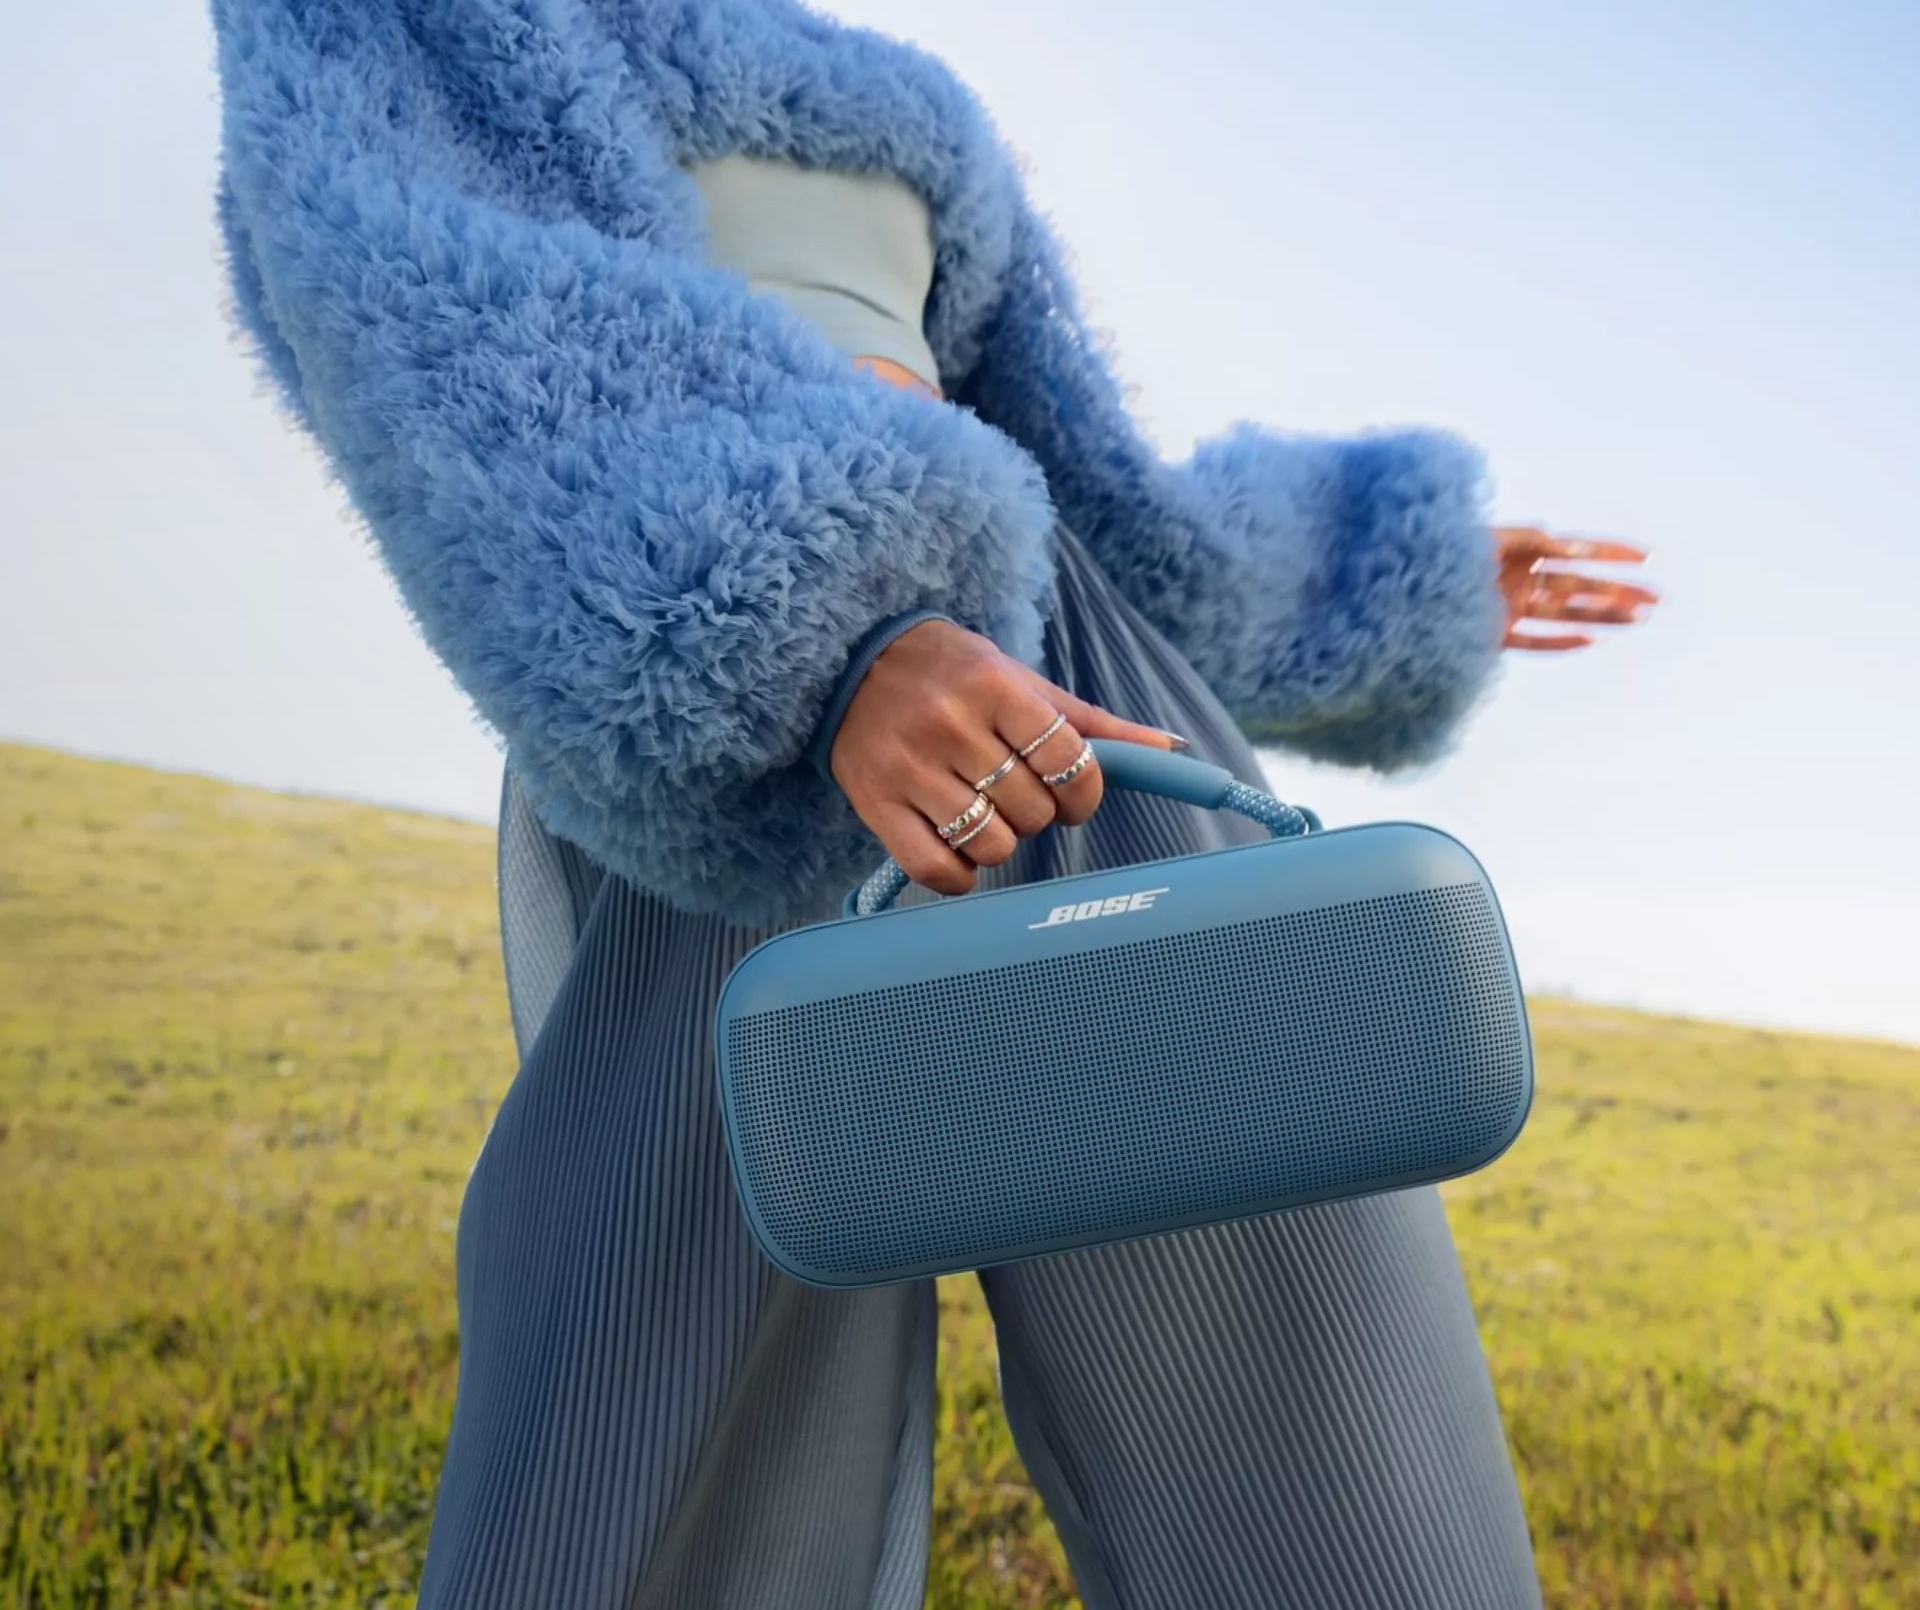 Young woman carrying a Bose SoundLink Max Portable Speaker through a field